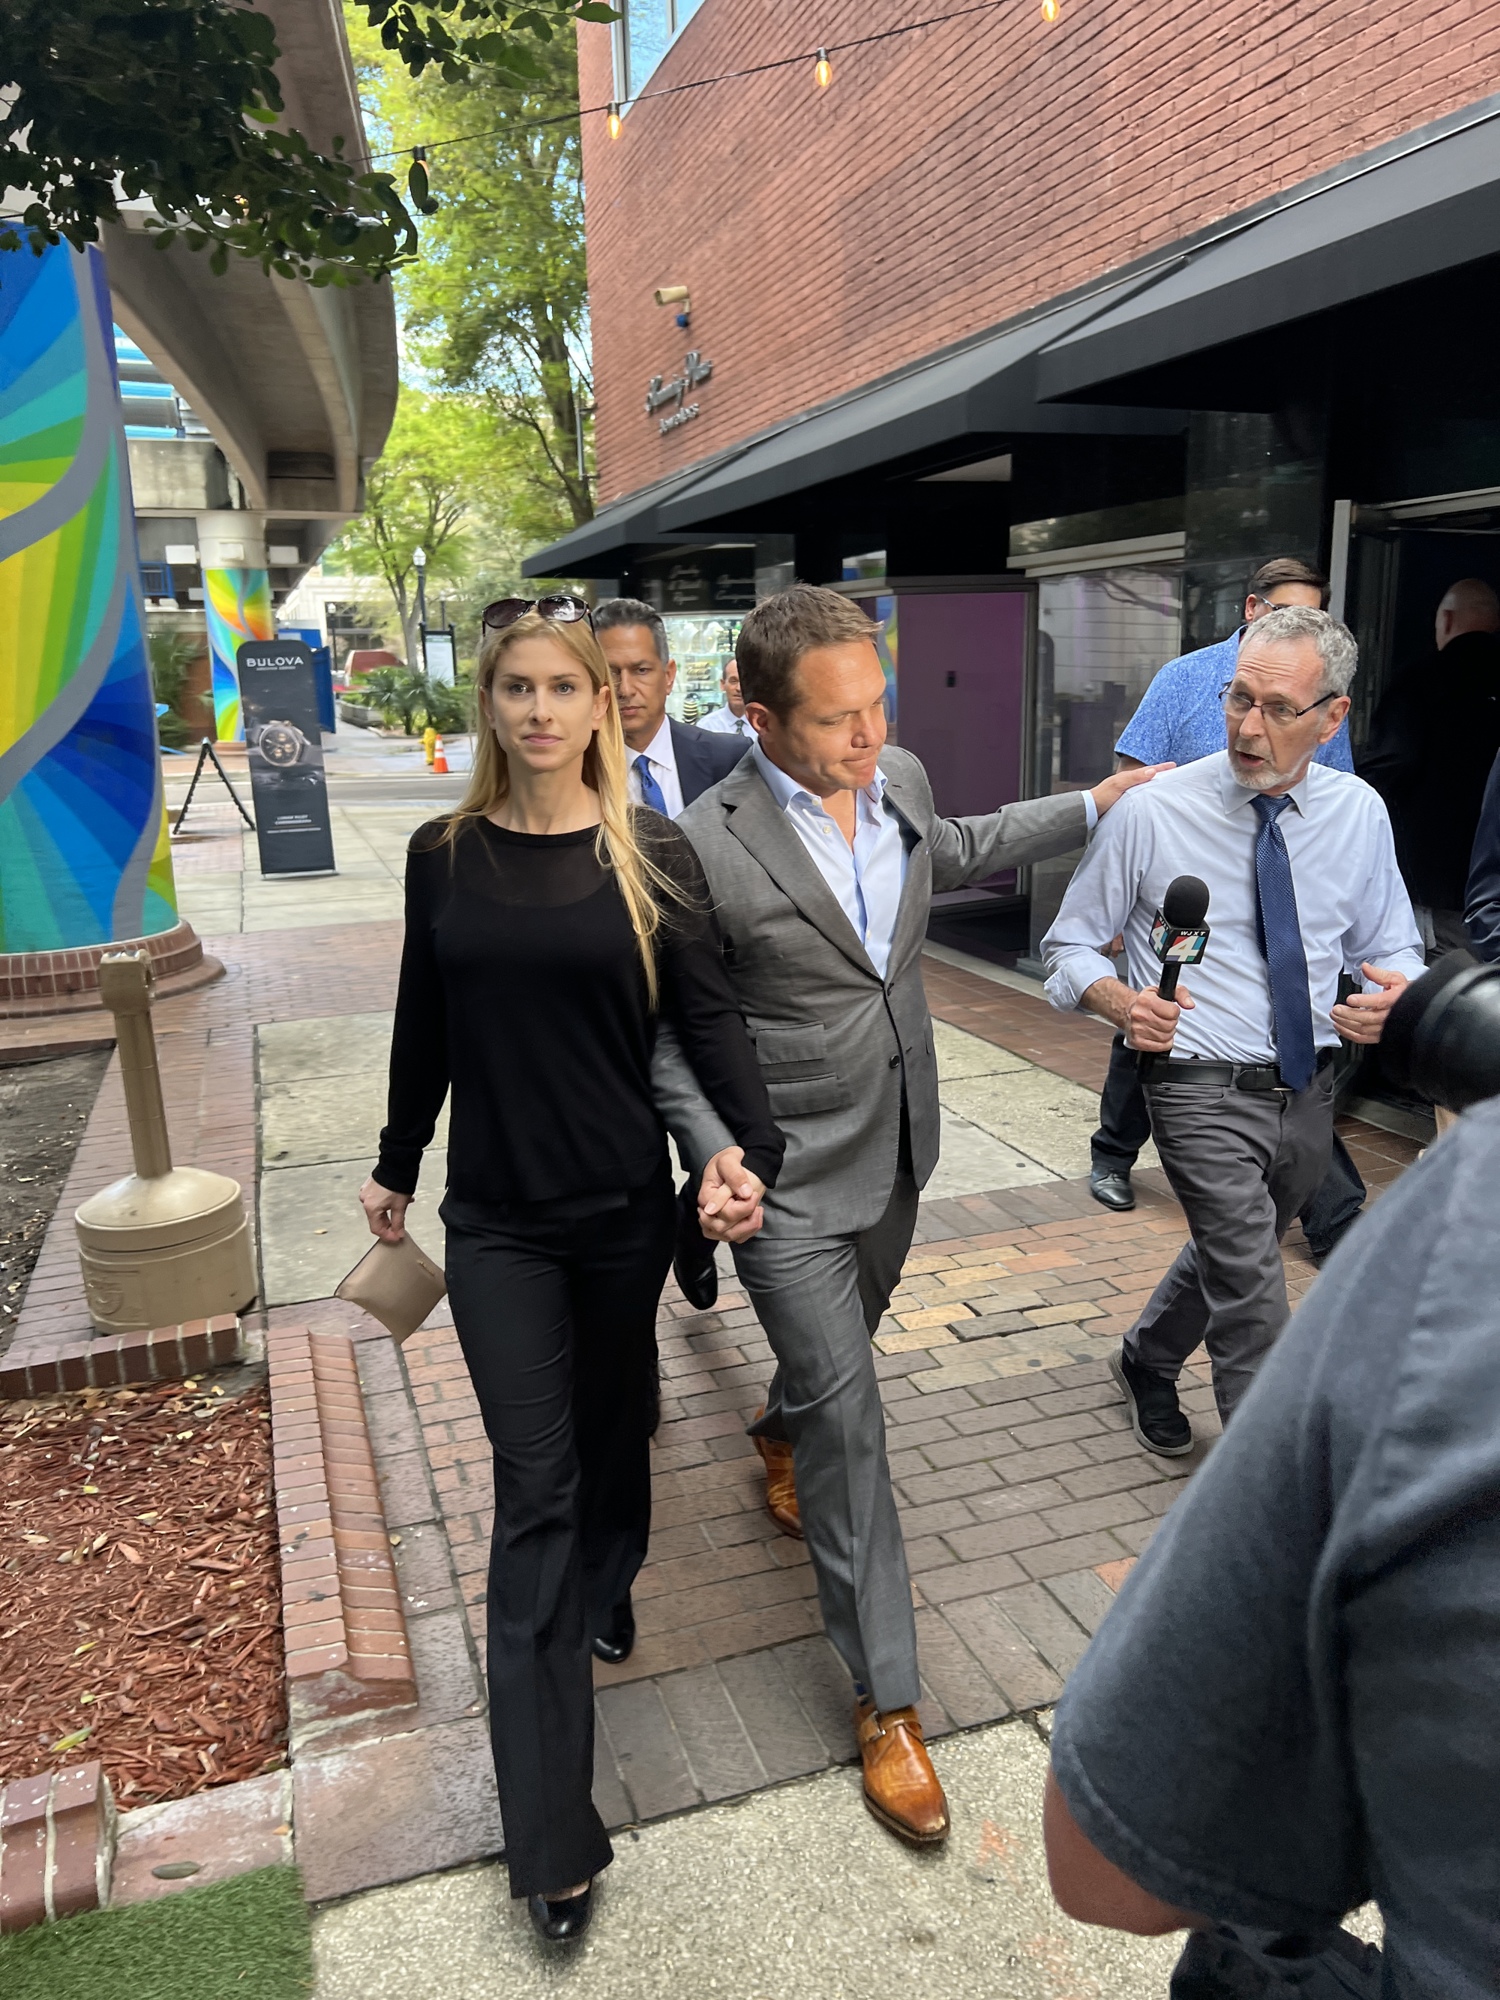 Fired JEA CEO Aaron Zahn puts his hand on the shoulder of WJXT Channel 4 reporter Jim Piggott March 8 after leaving the federal courthouse where he pleaded not guilty to federal charges.